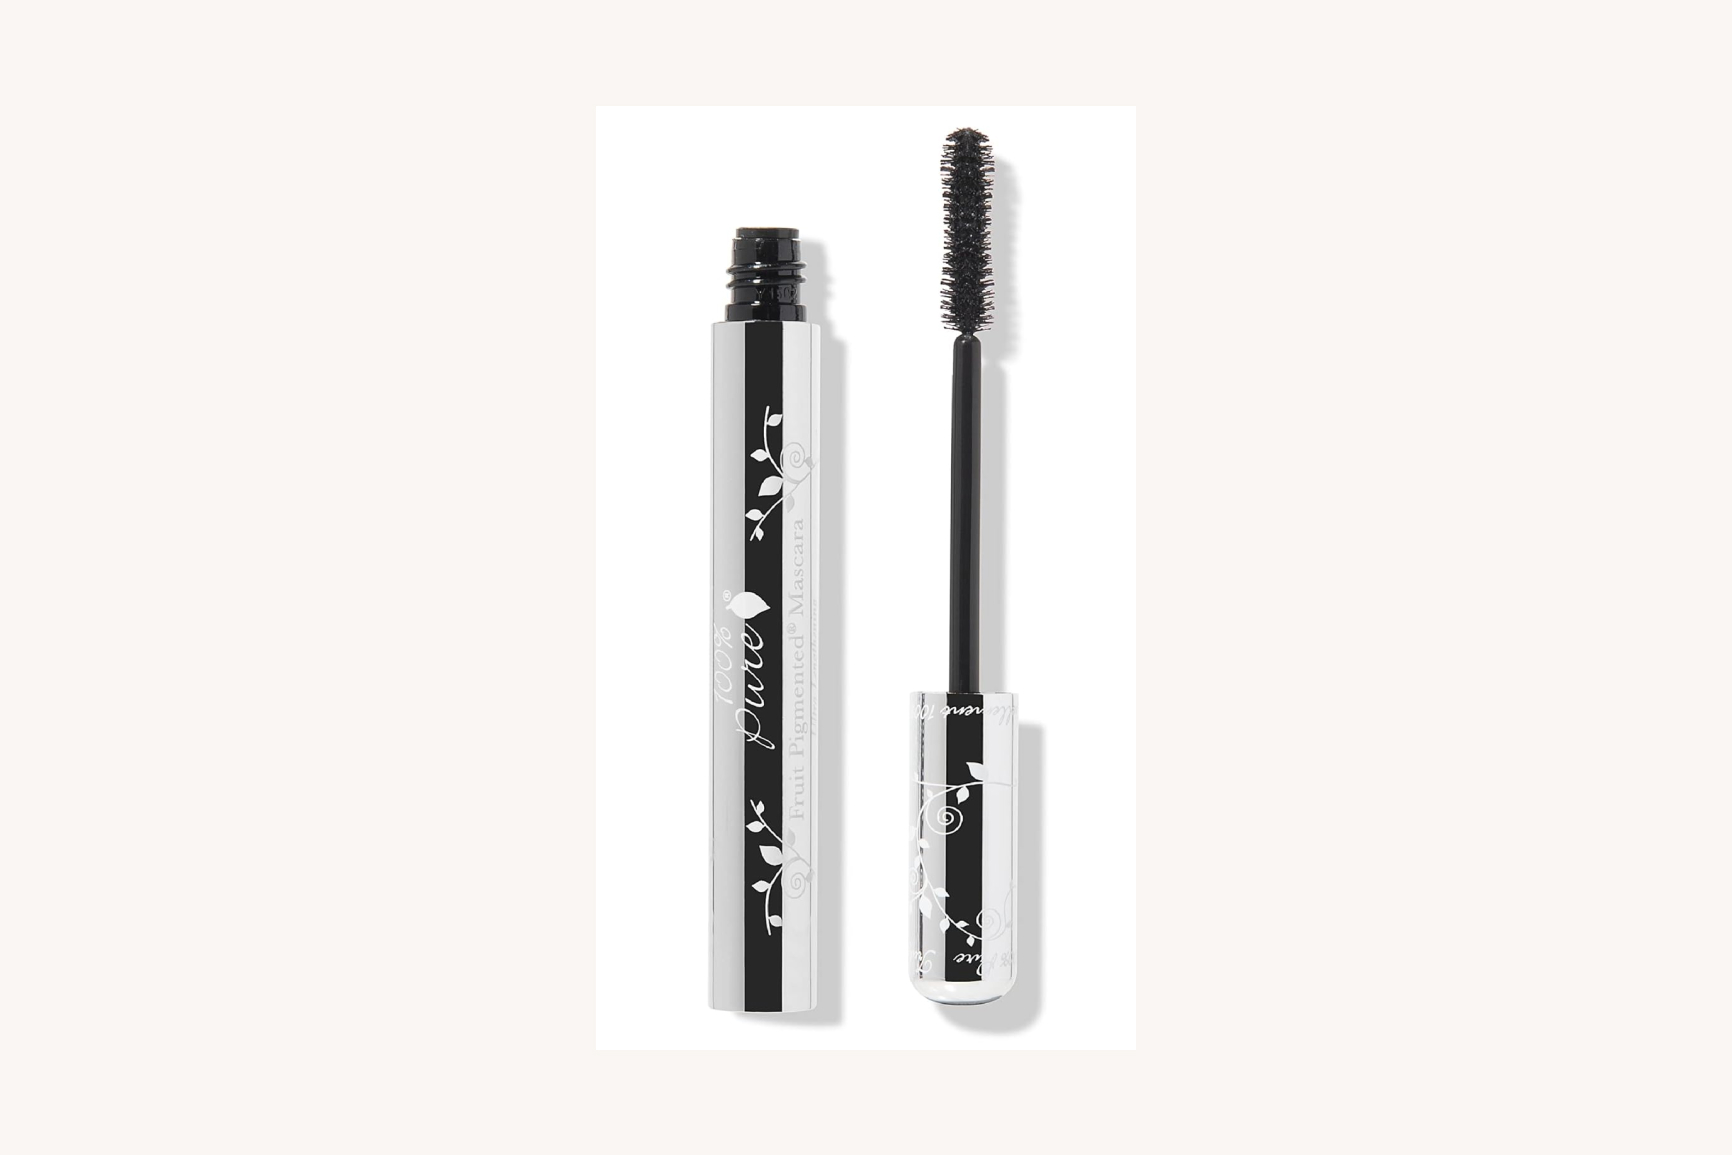 clean mascaras like 100 % pure dont use synthetic fragrance